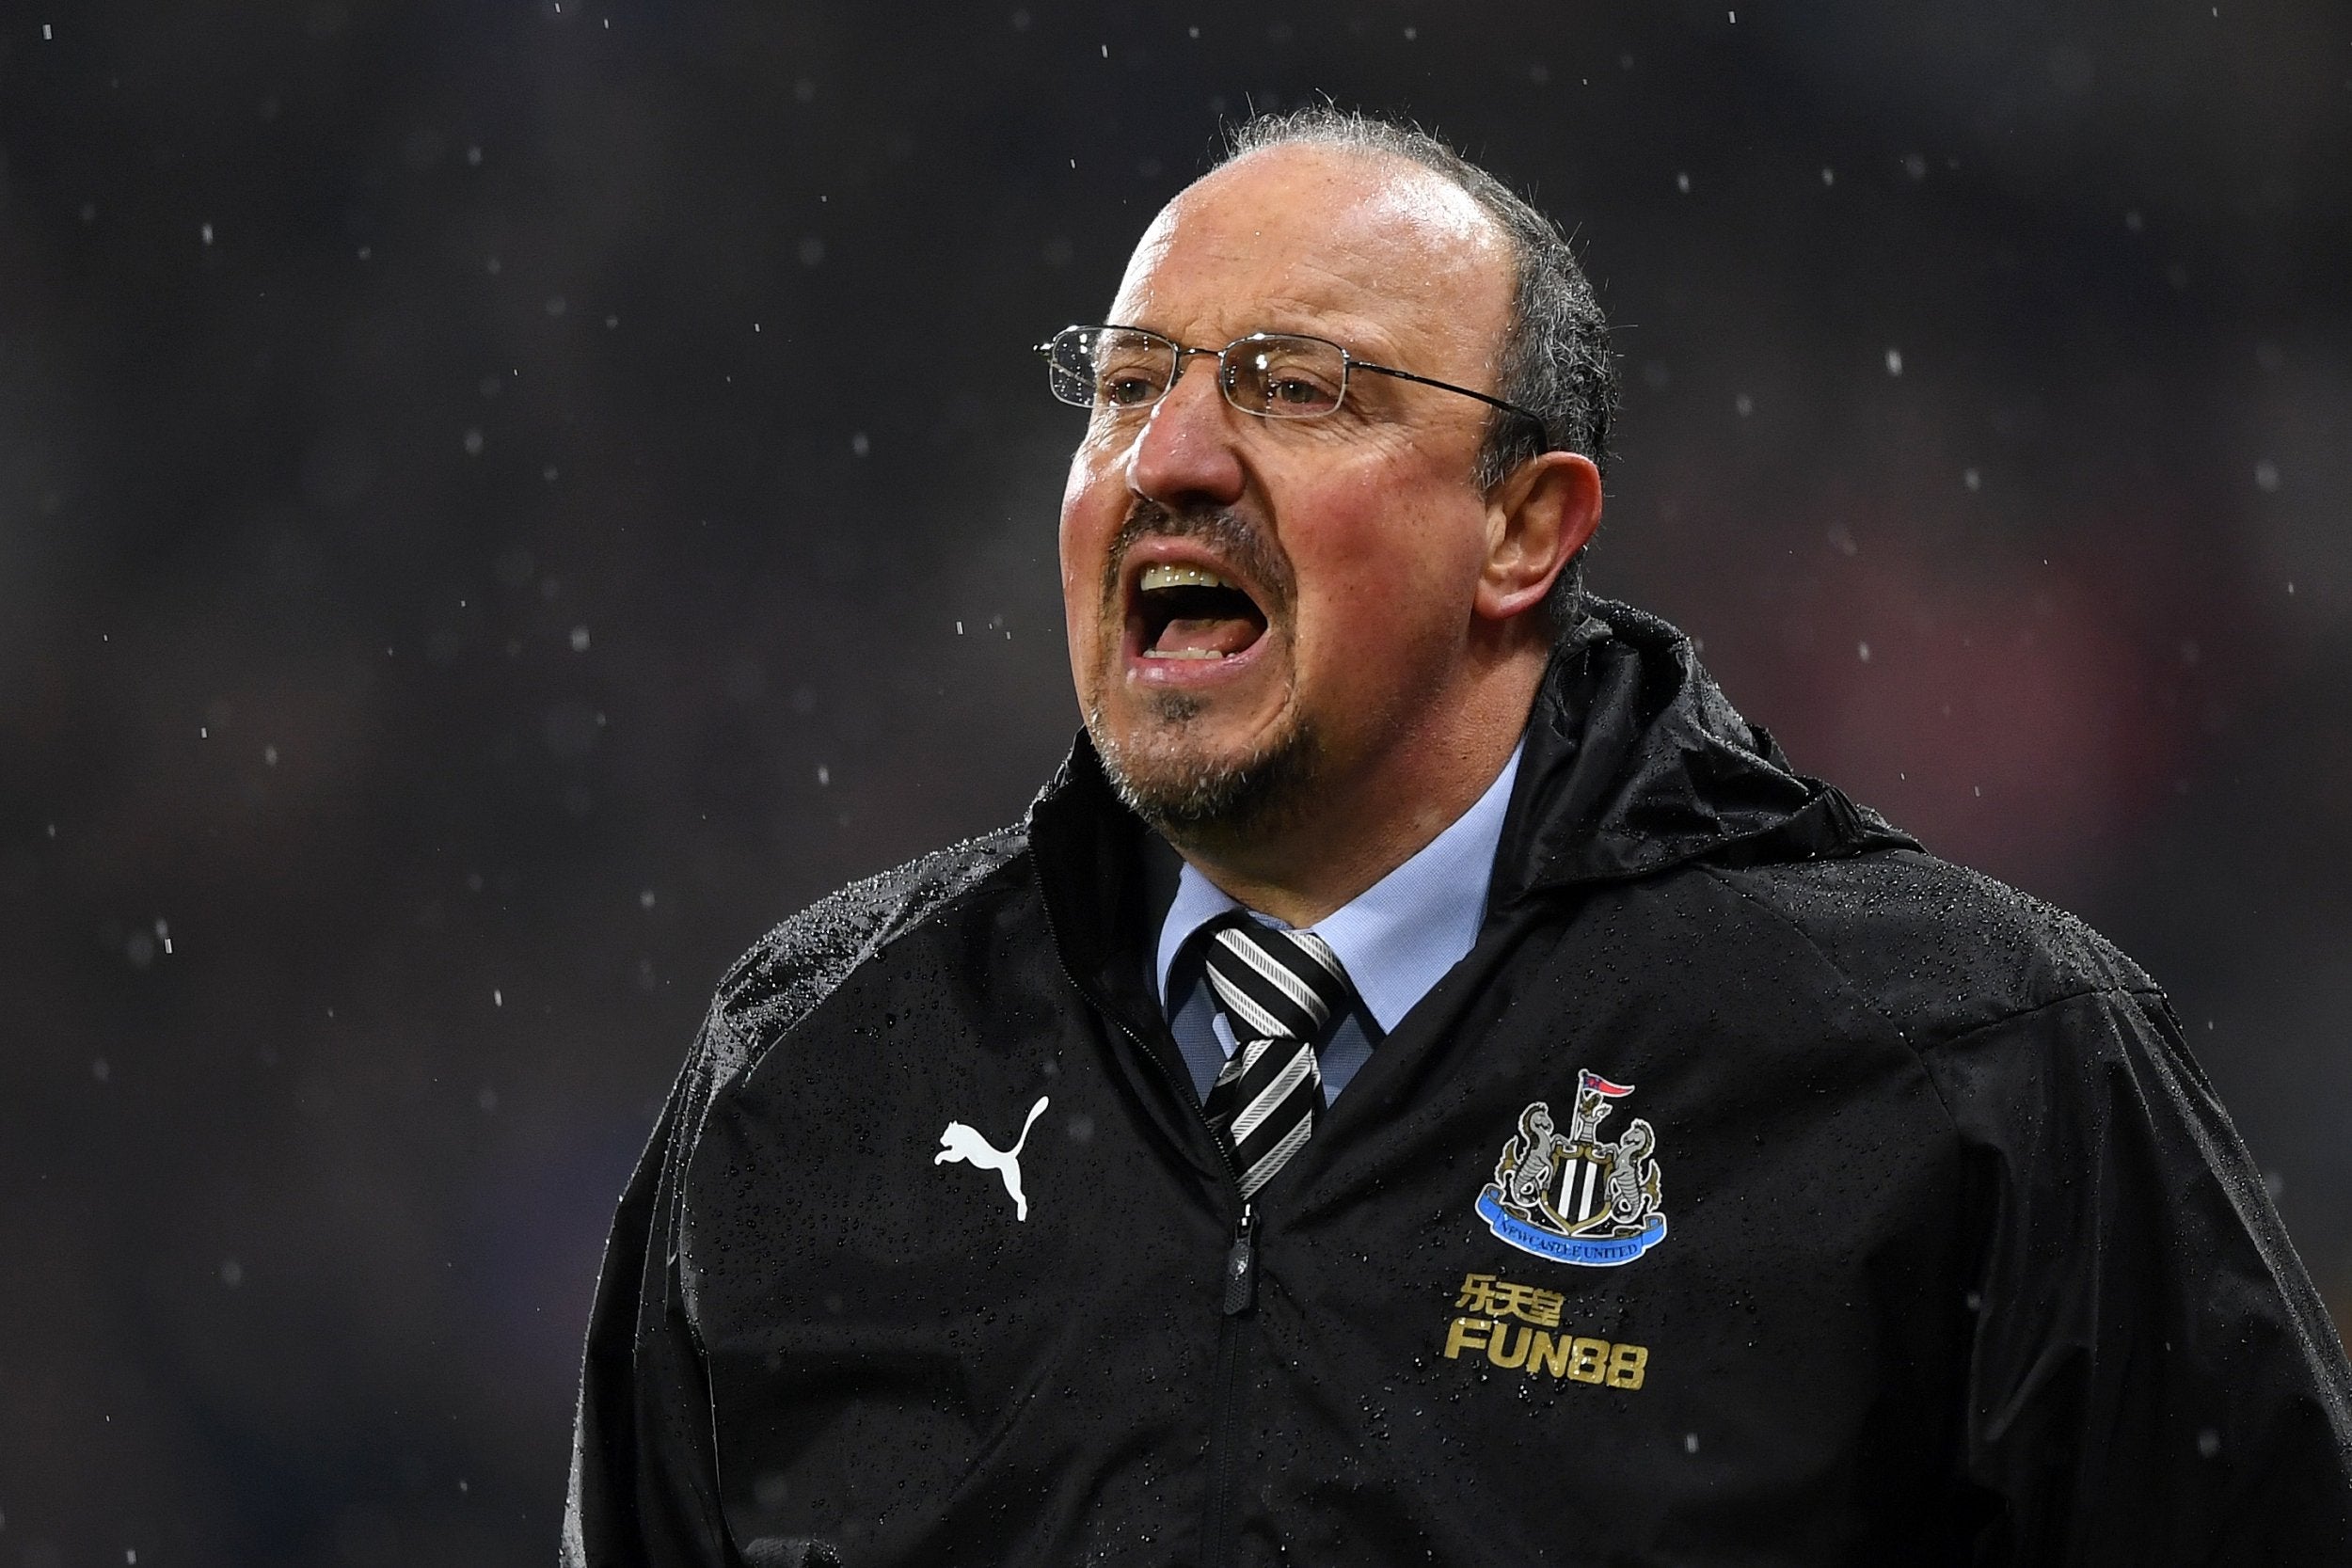 Rafael Benitez's side now move into 14th place in the Premier League